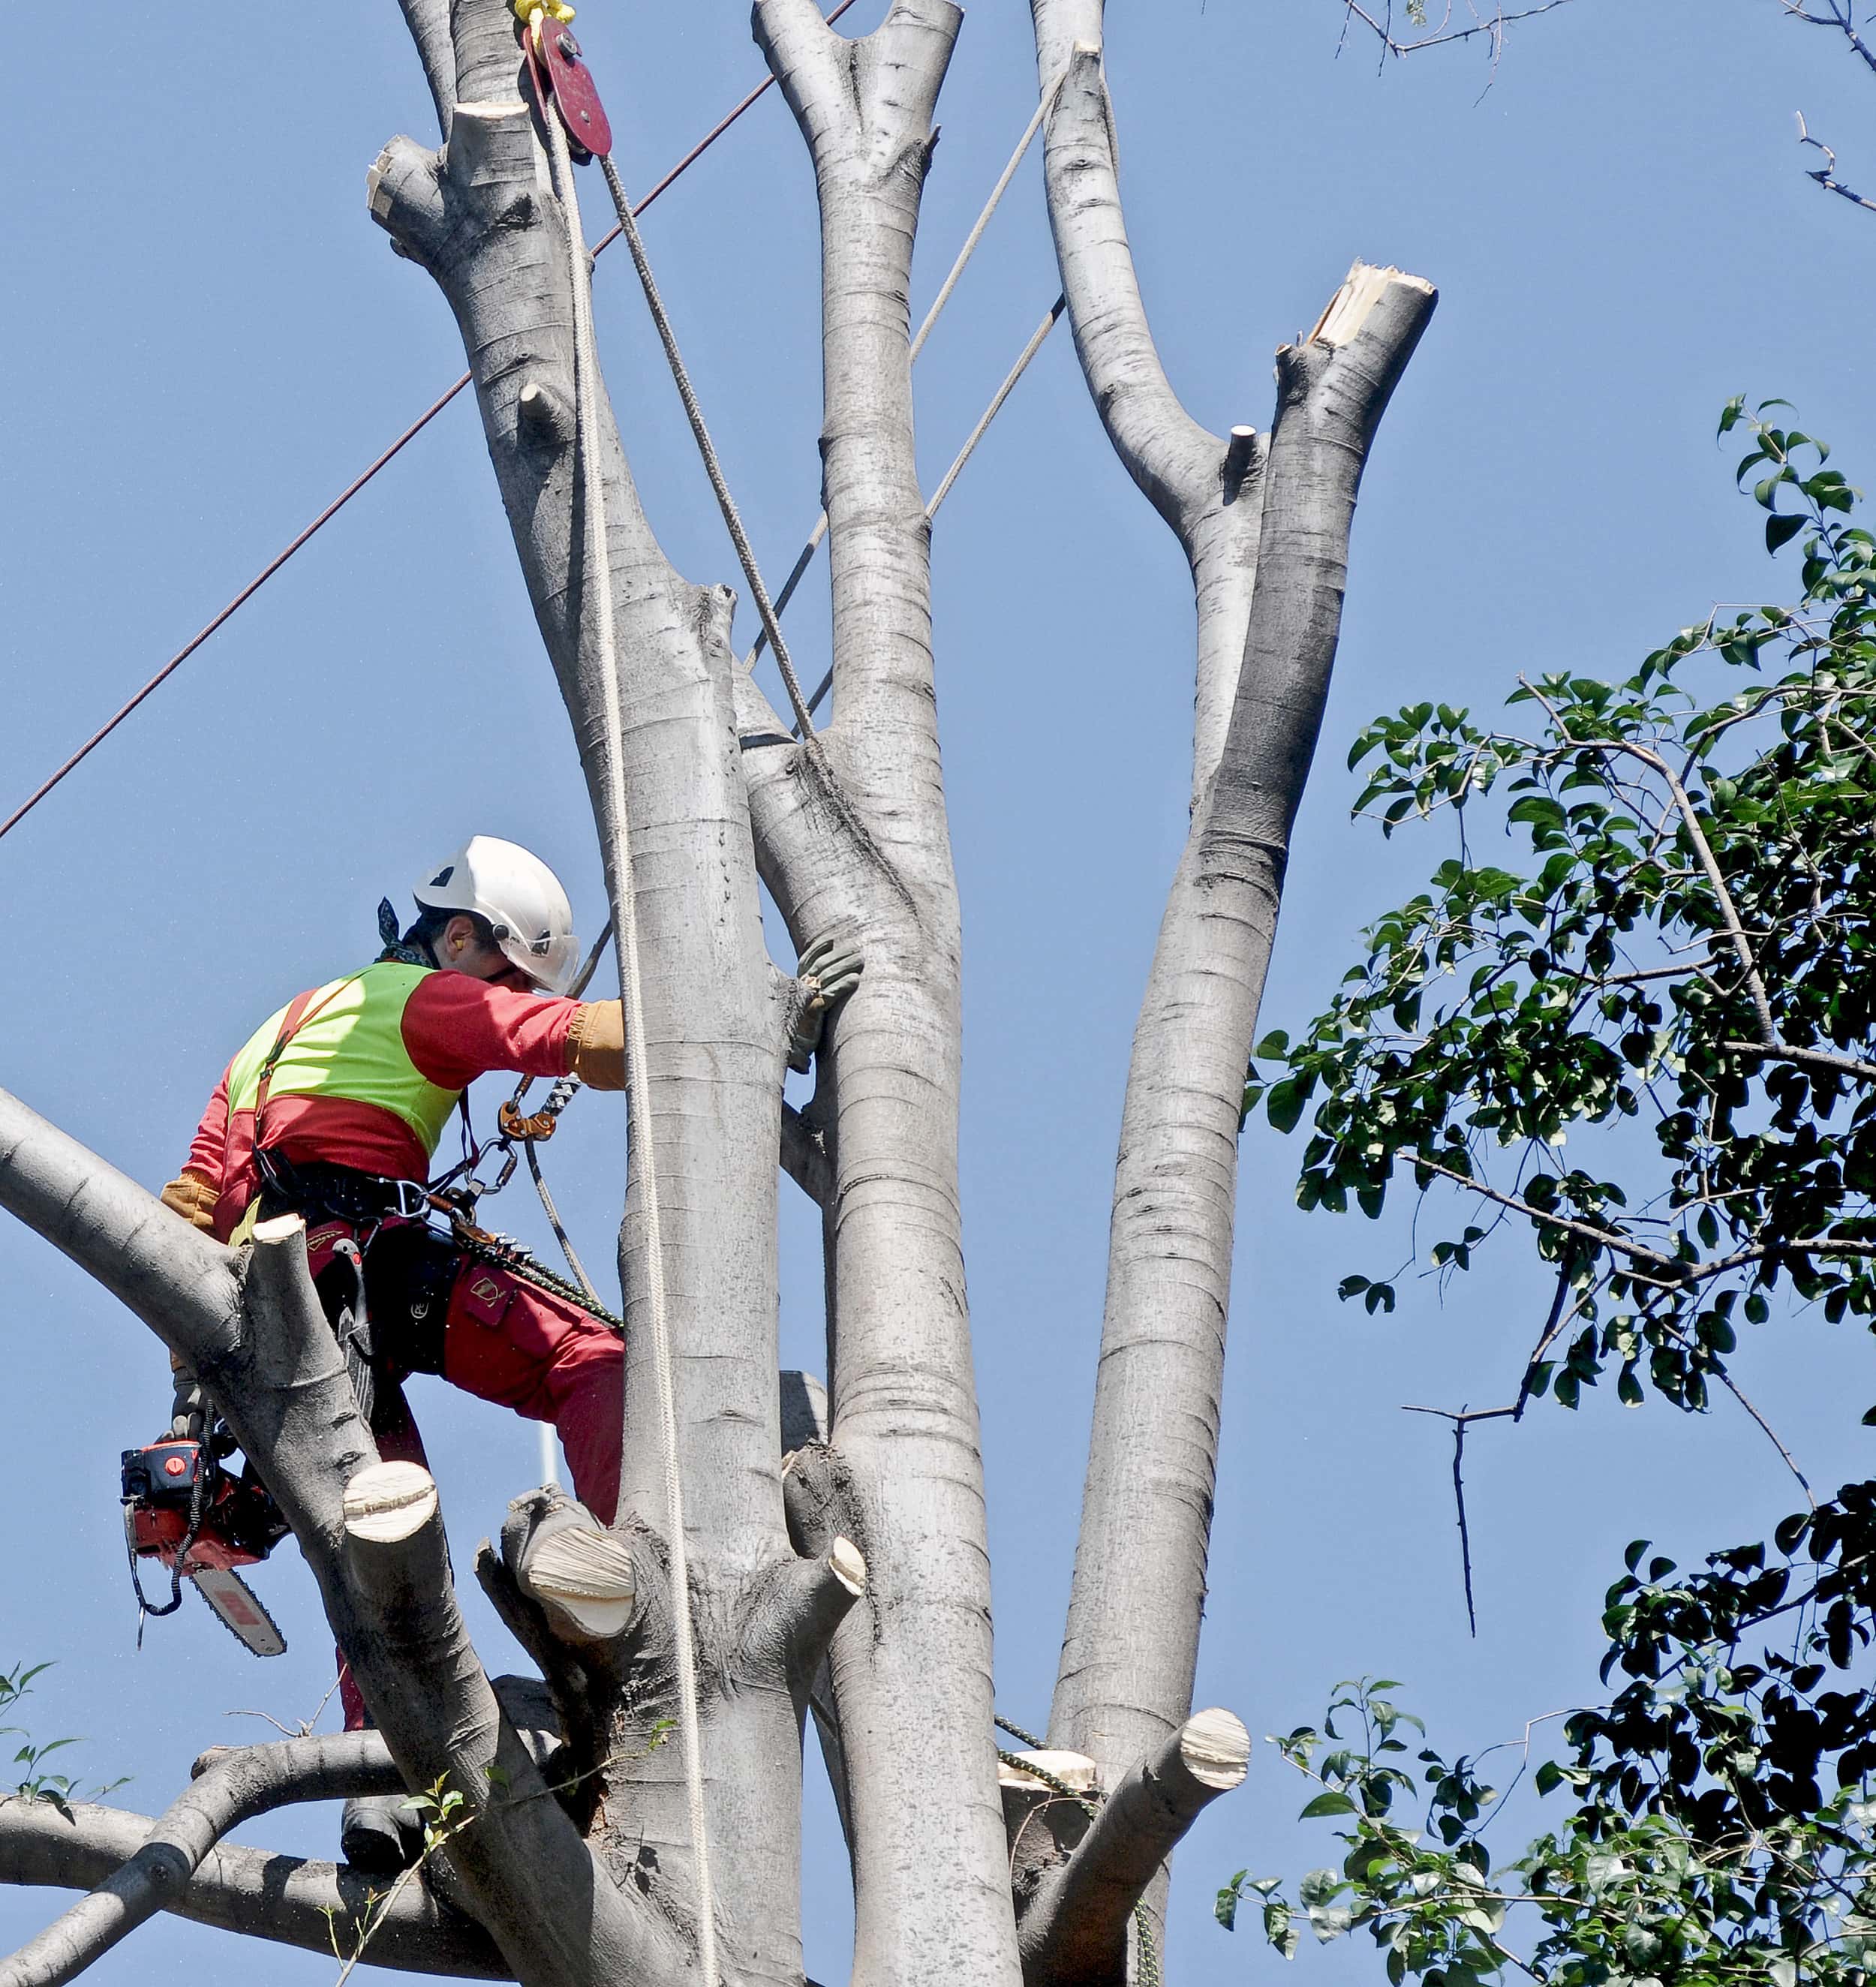 an image of a man climging a tree and cutting down branches